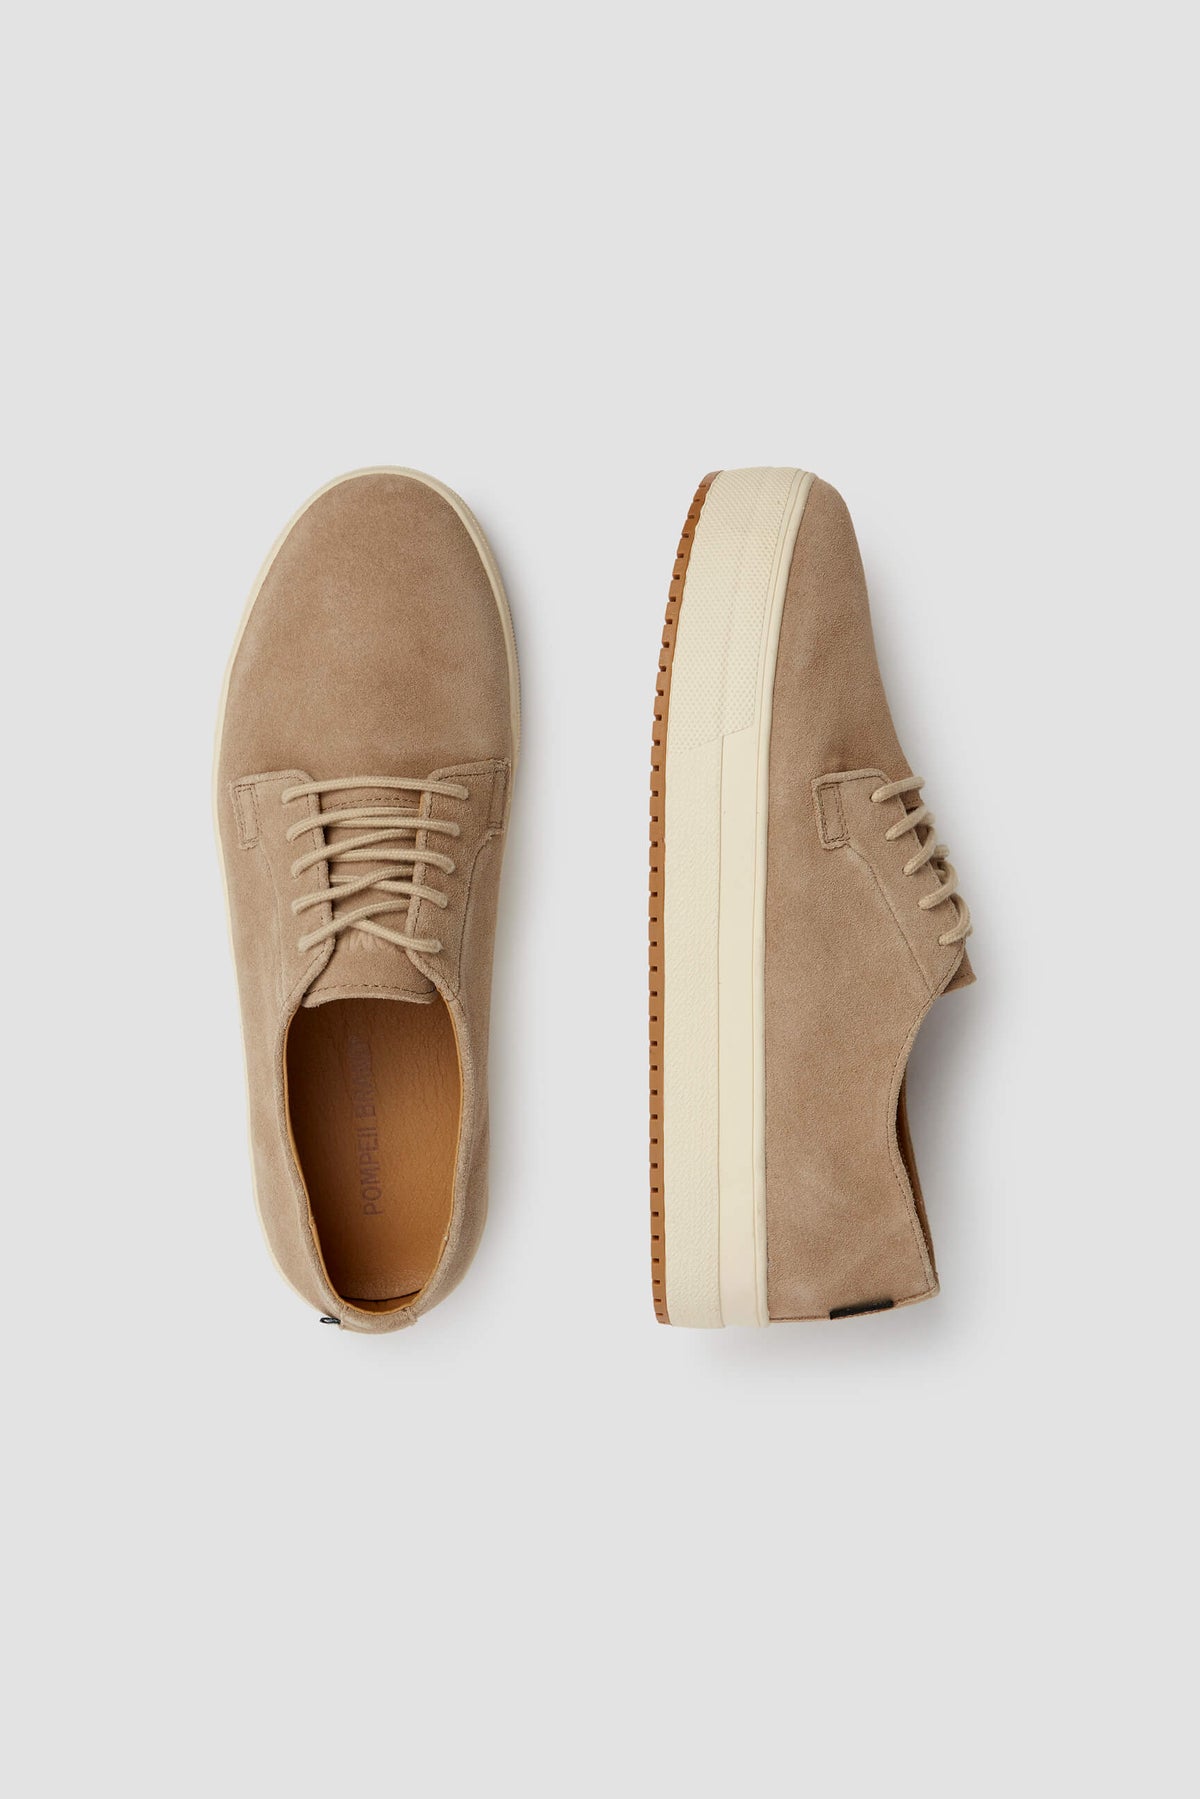 DUNNE SUEDE OYSTER